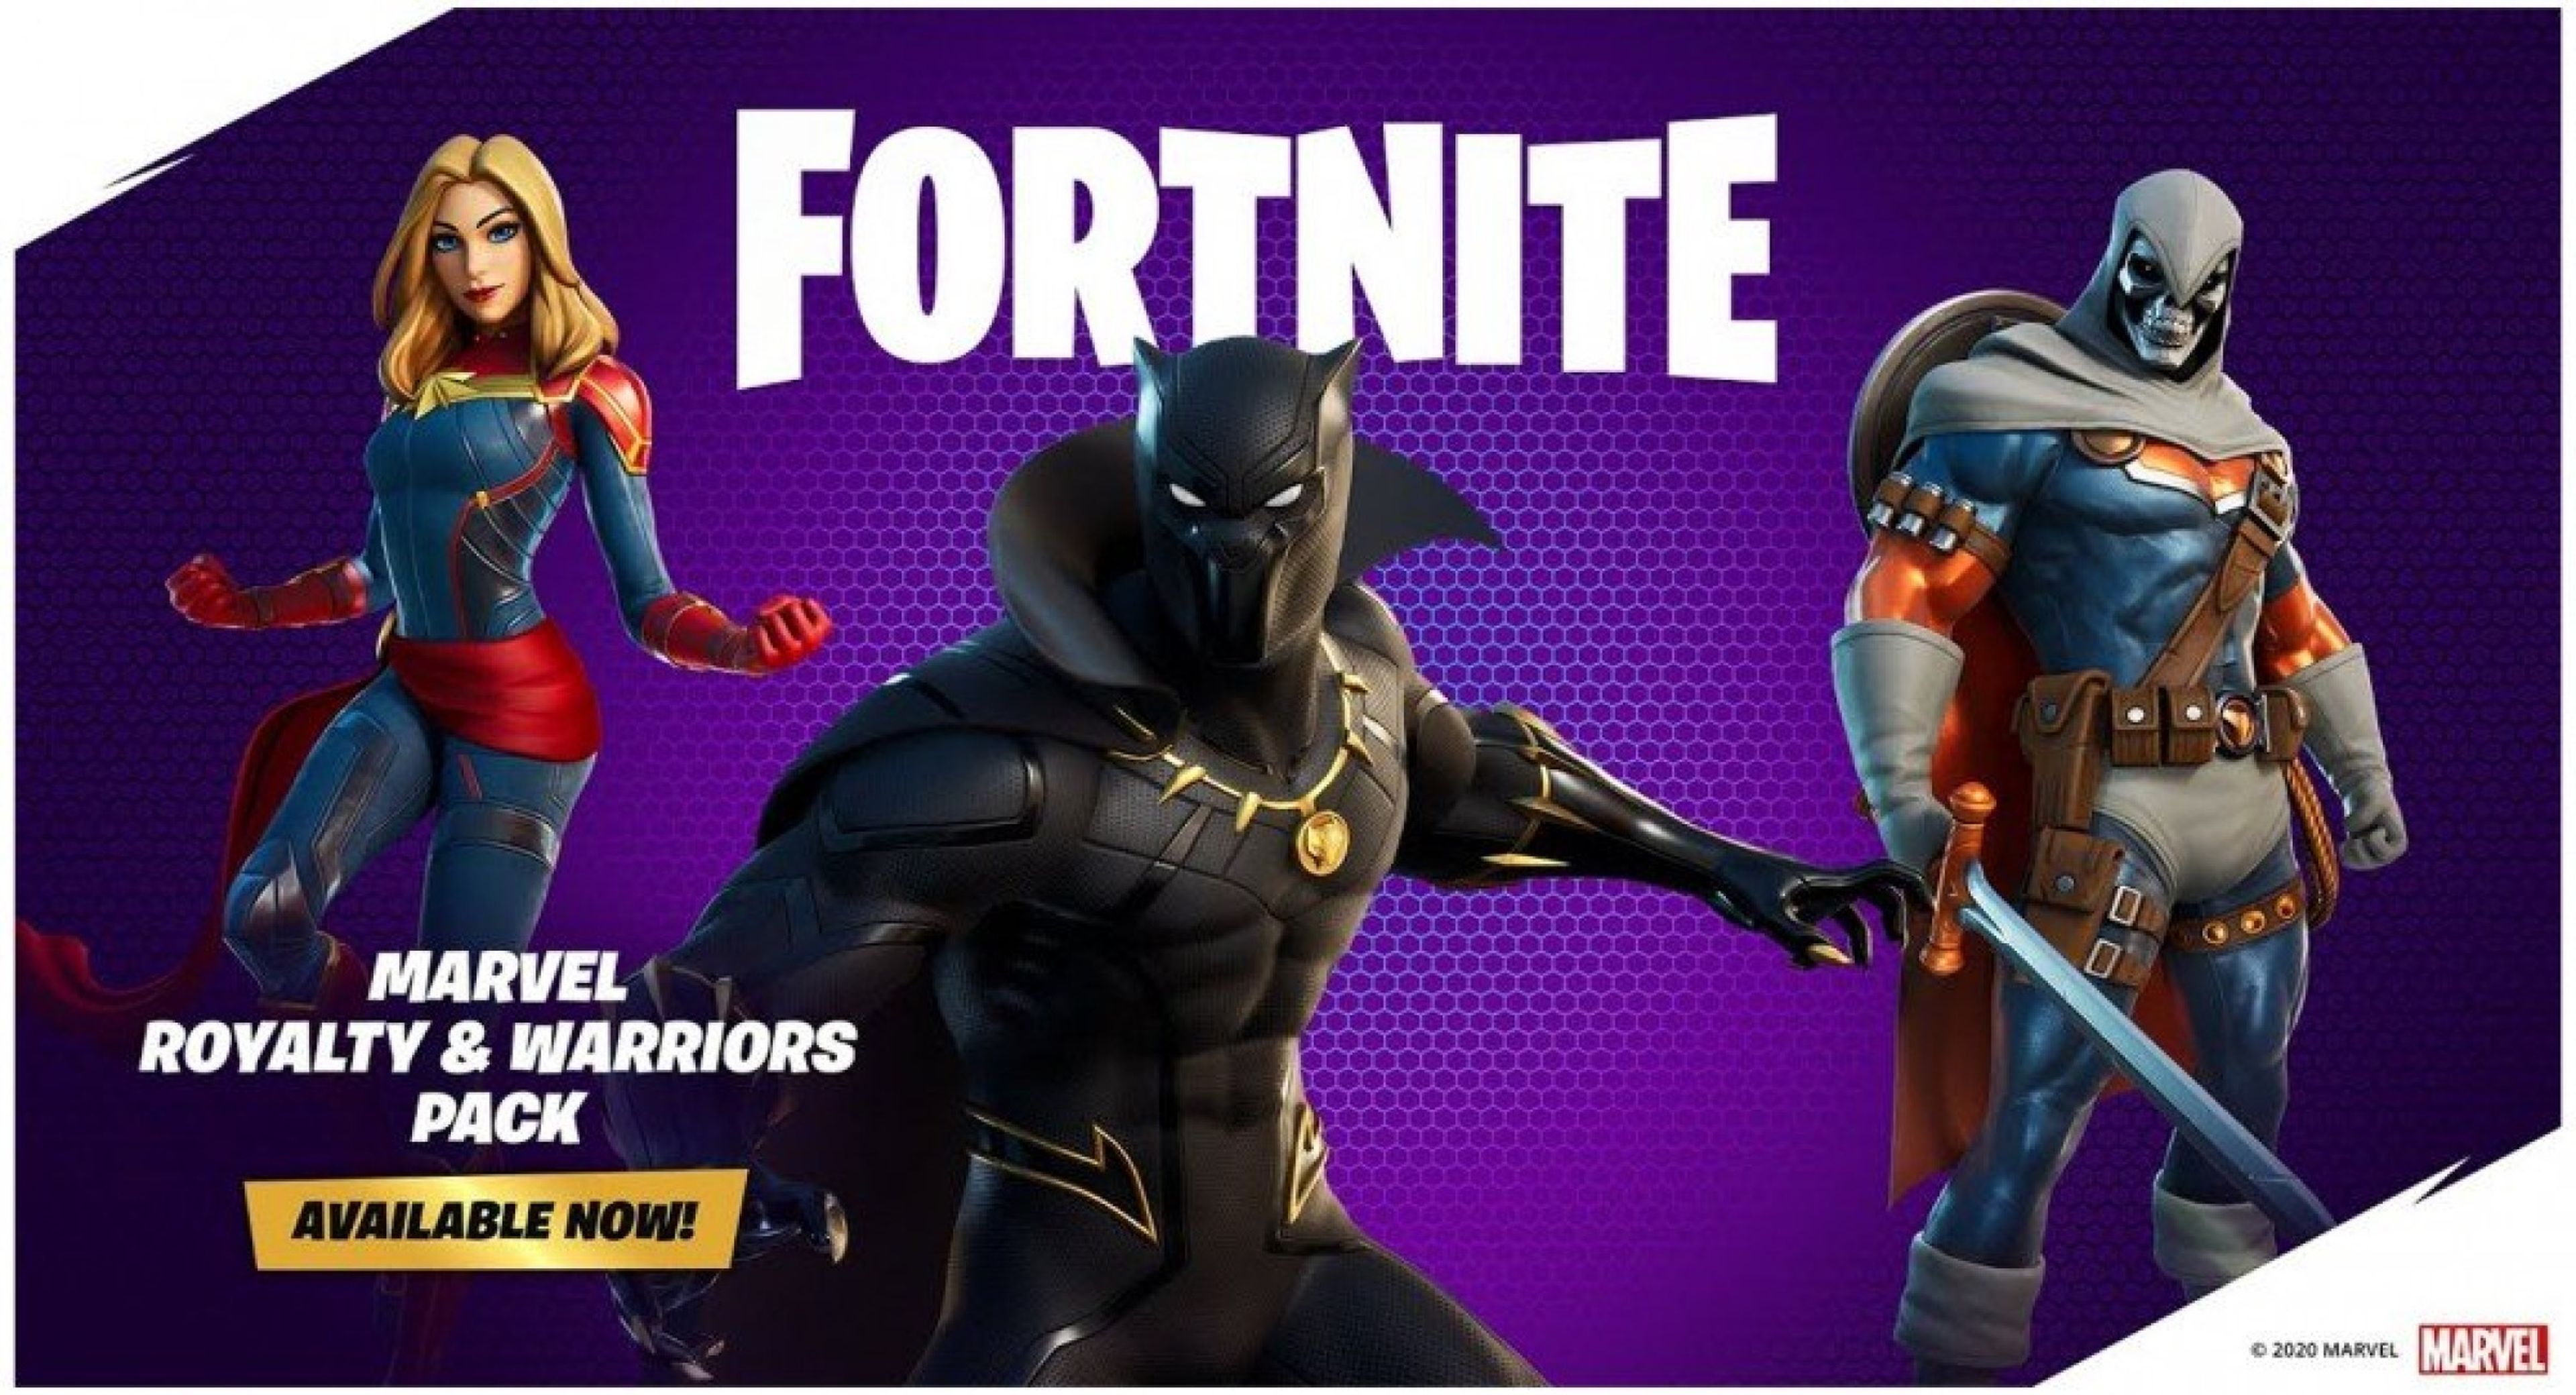 Fortnite Marvel Royalty and Warriors Pack